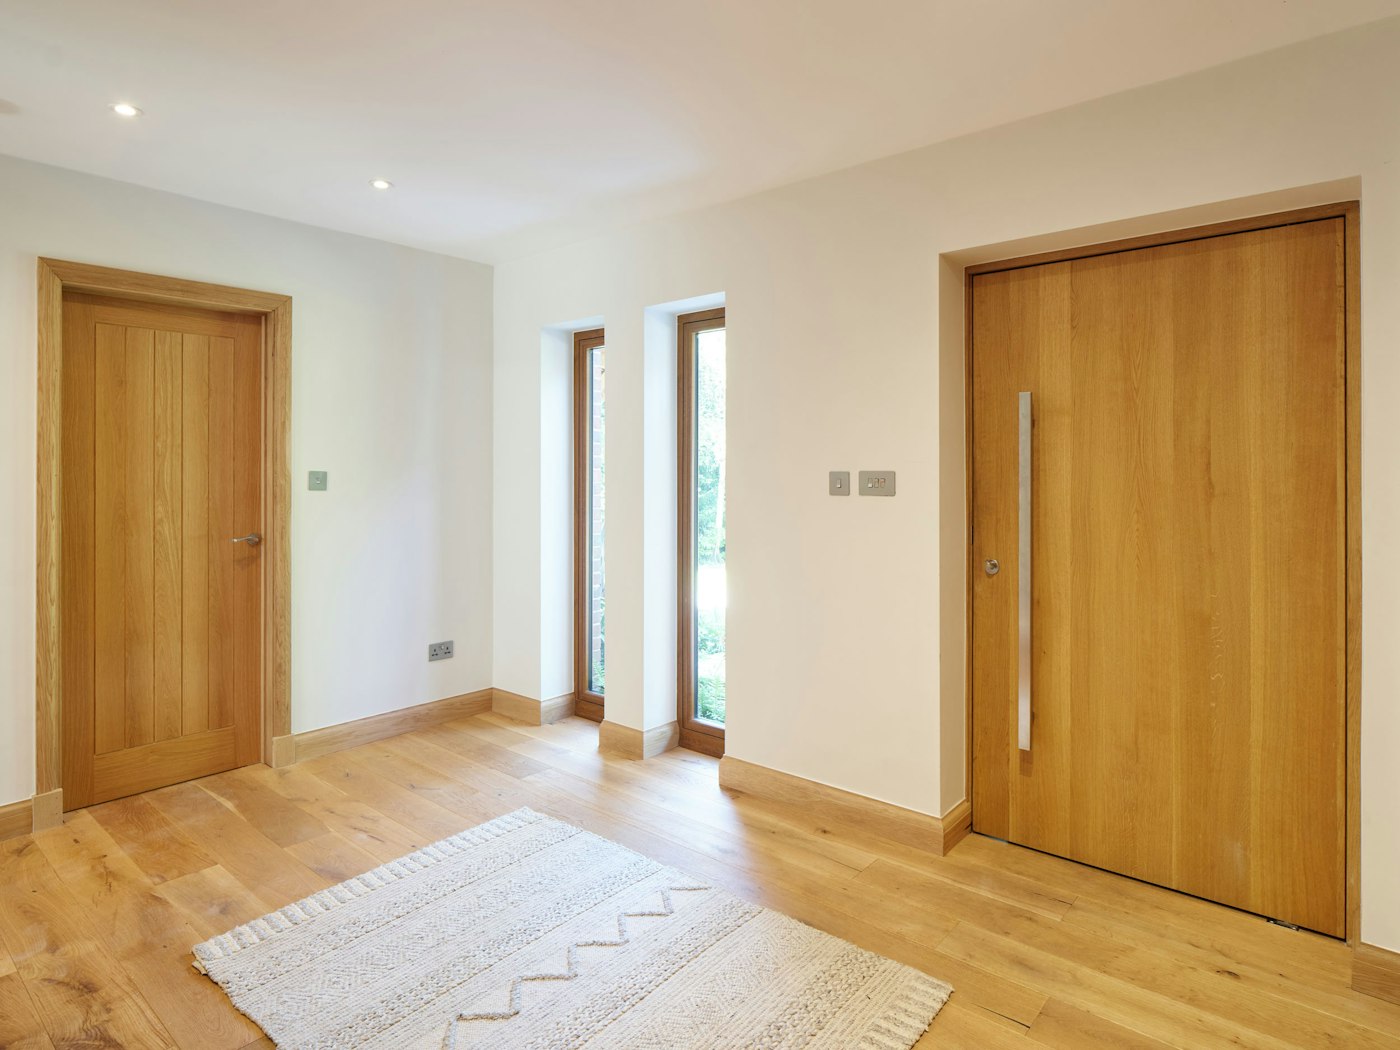 The inside of the door is a simple raw finish to complement the wooden floor and internal doors